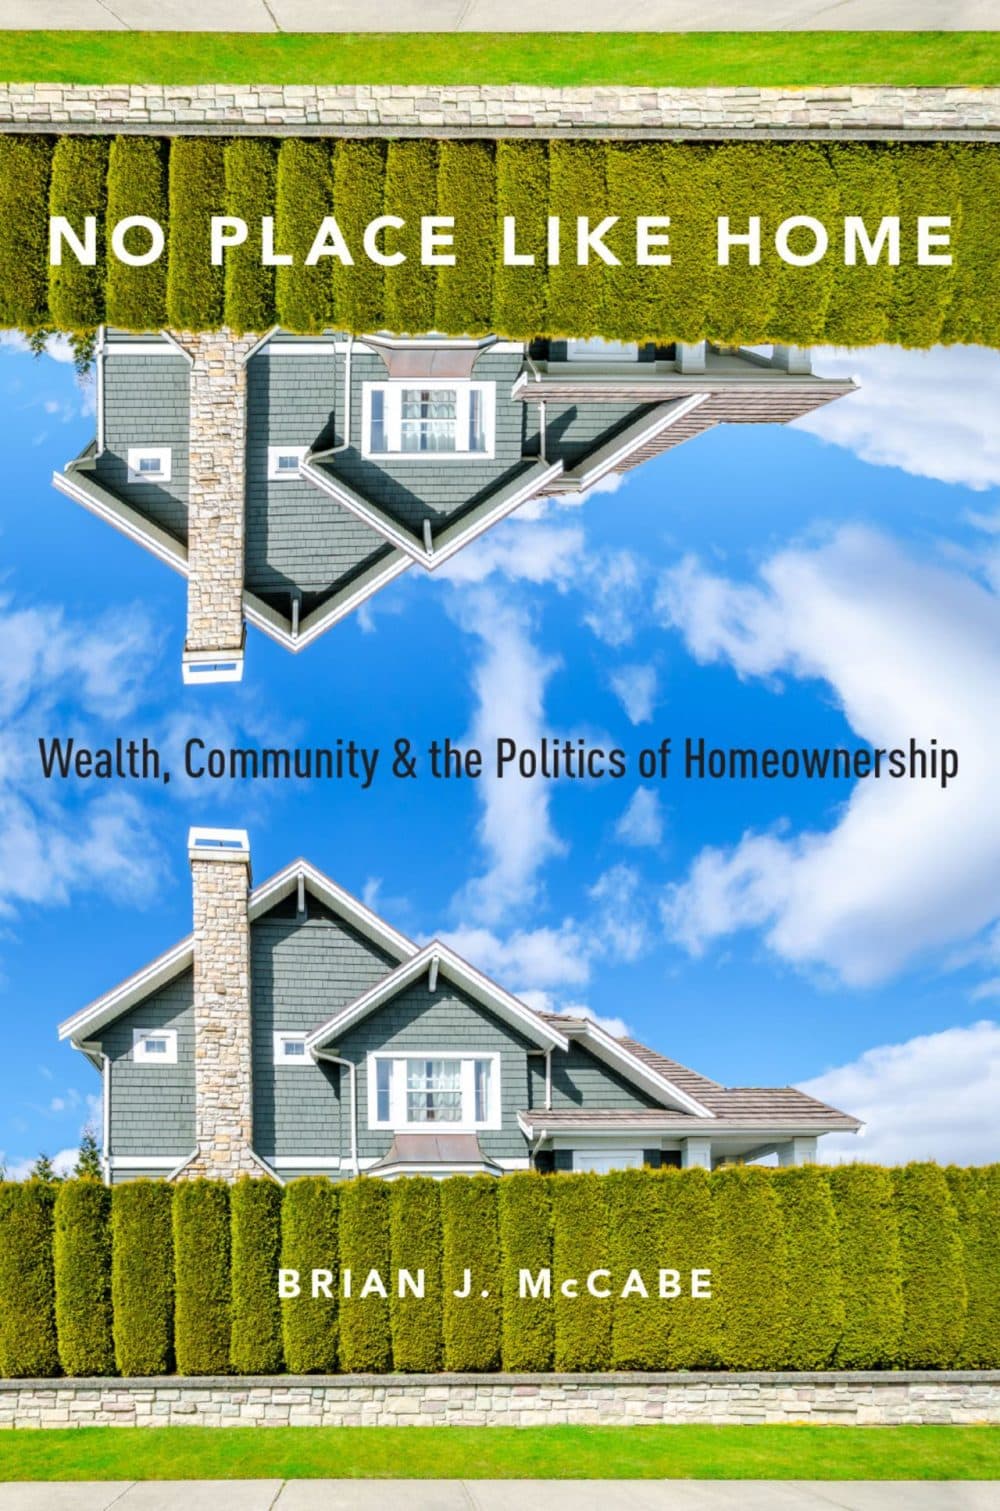 In his book, “No Place Like Home: Wealth, Community &amp; Politics of Home Ownership,” Brian McCabe finds that our belief about home ownership as a way to improve civic life doesn't necessarily pan out. 